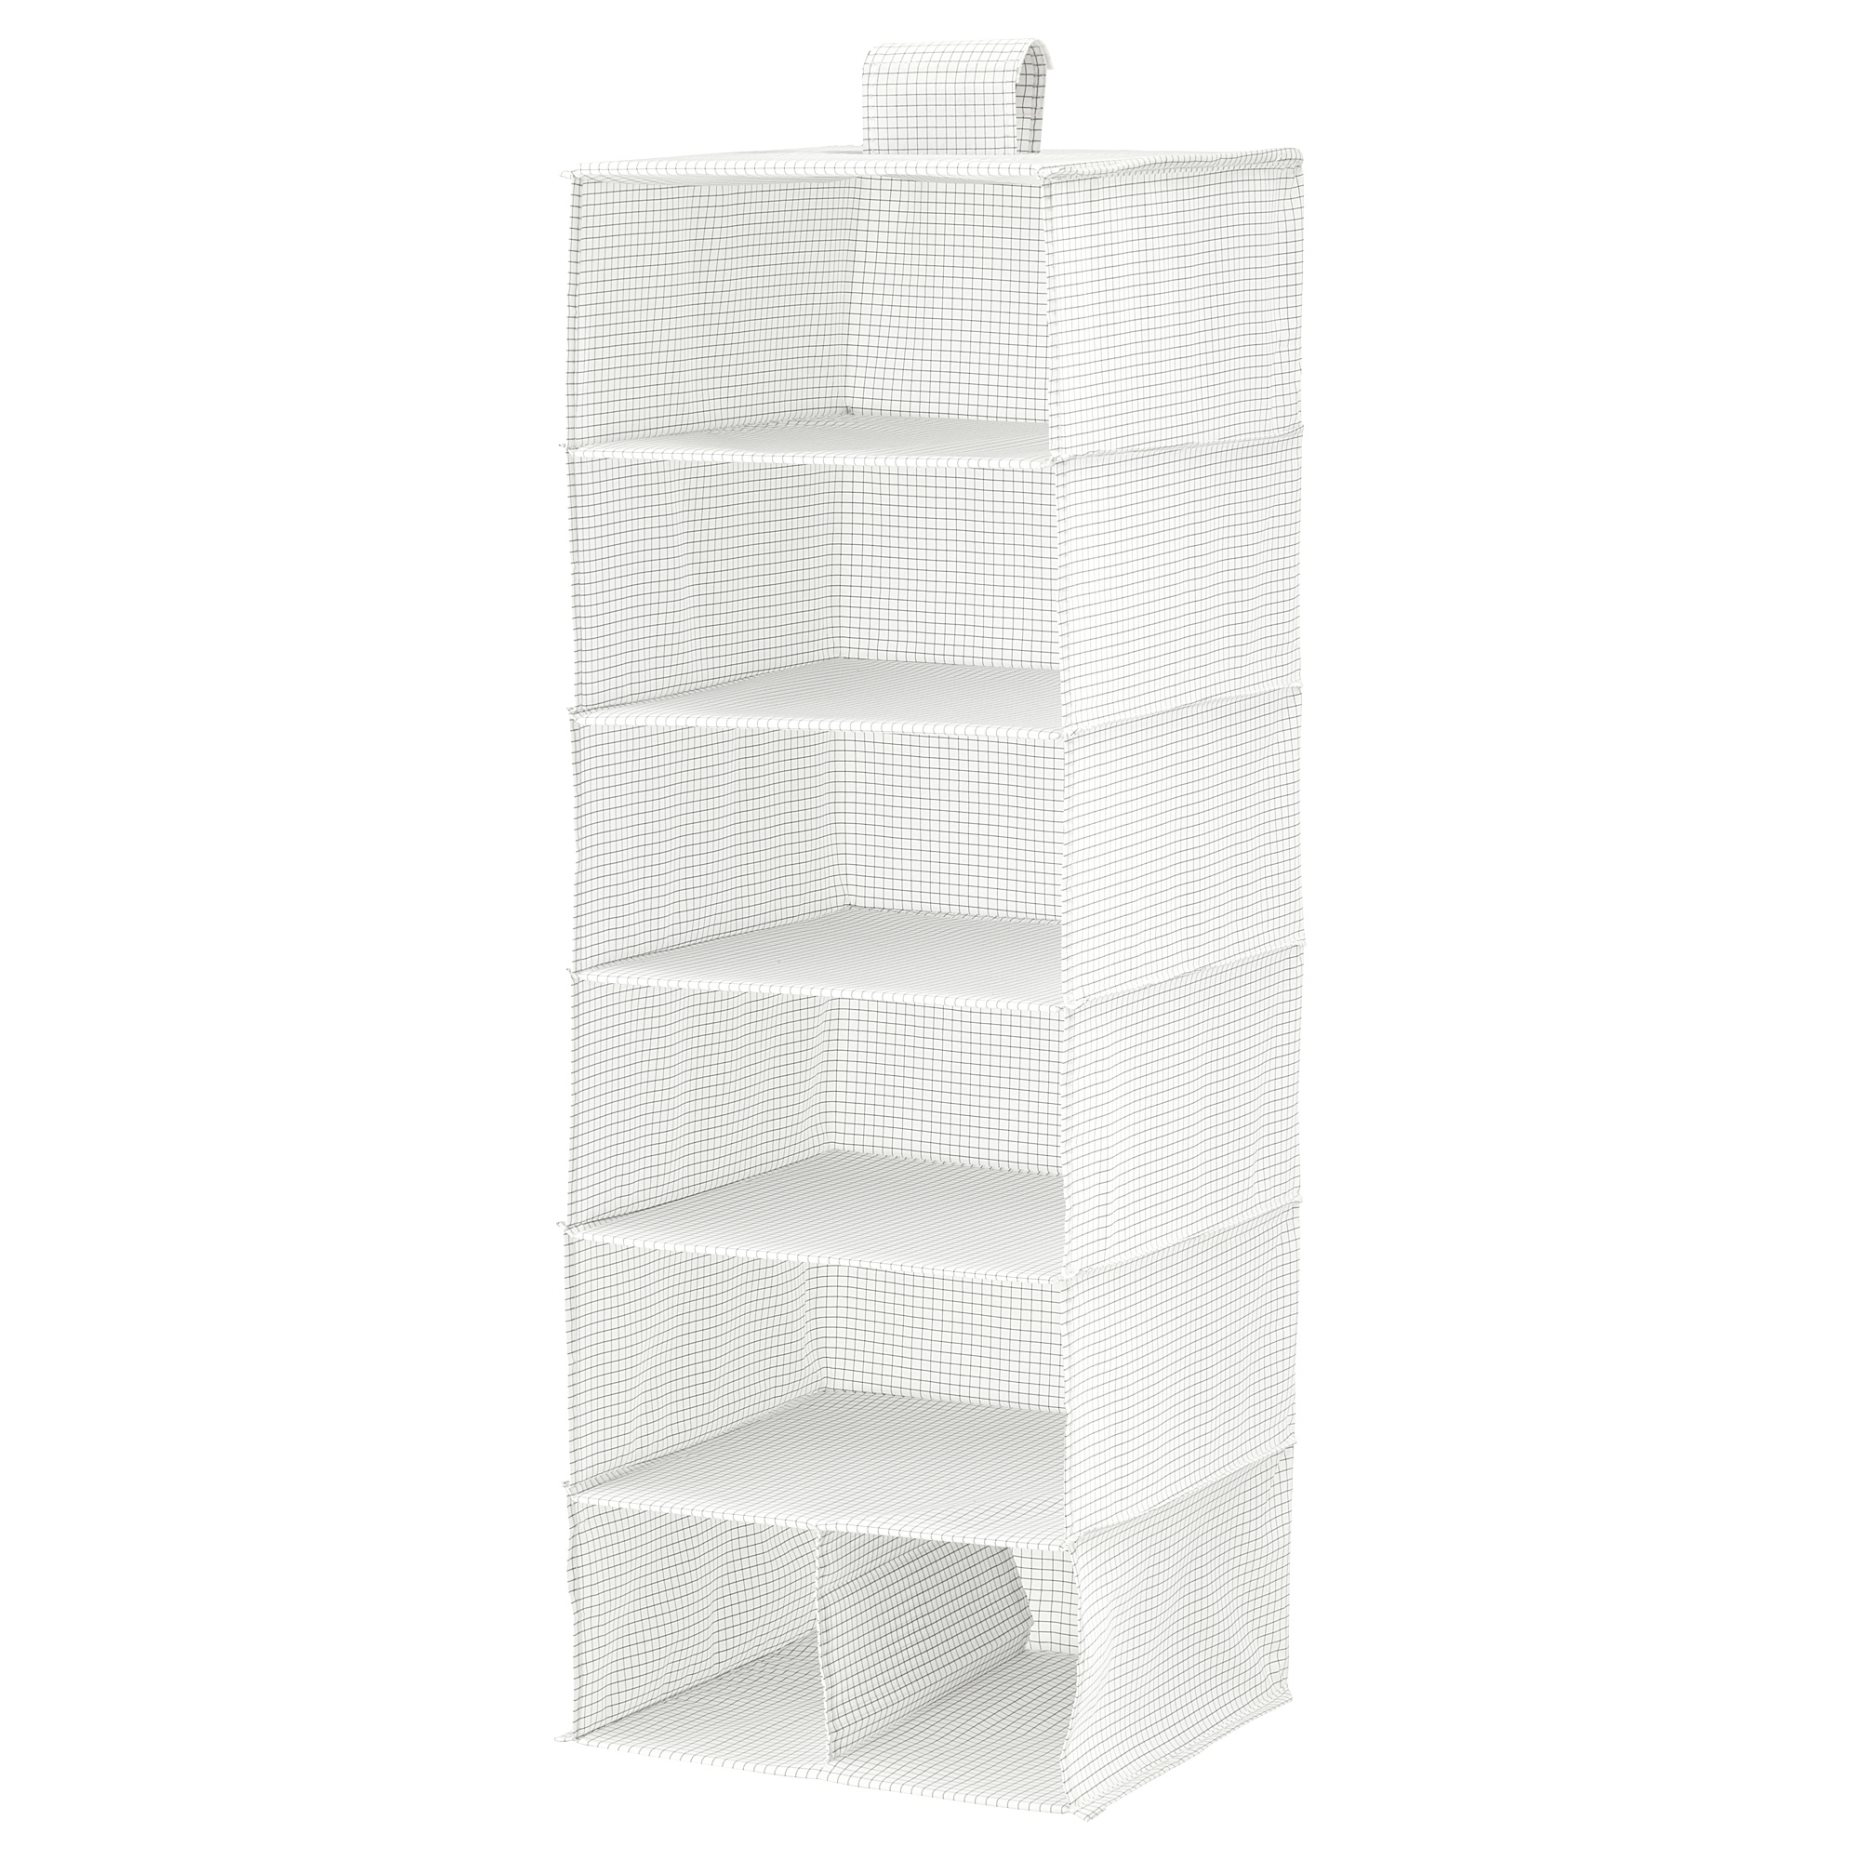 STUK, storage with 7 compartments, 703.708.56